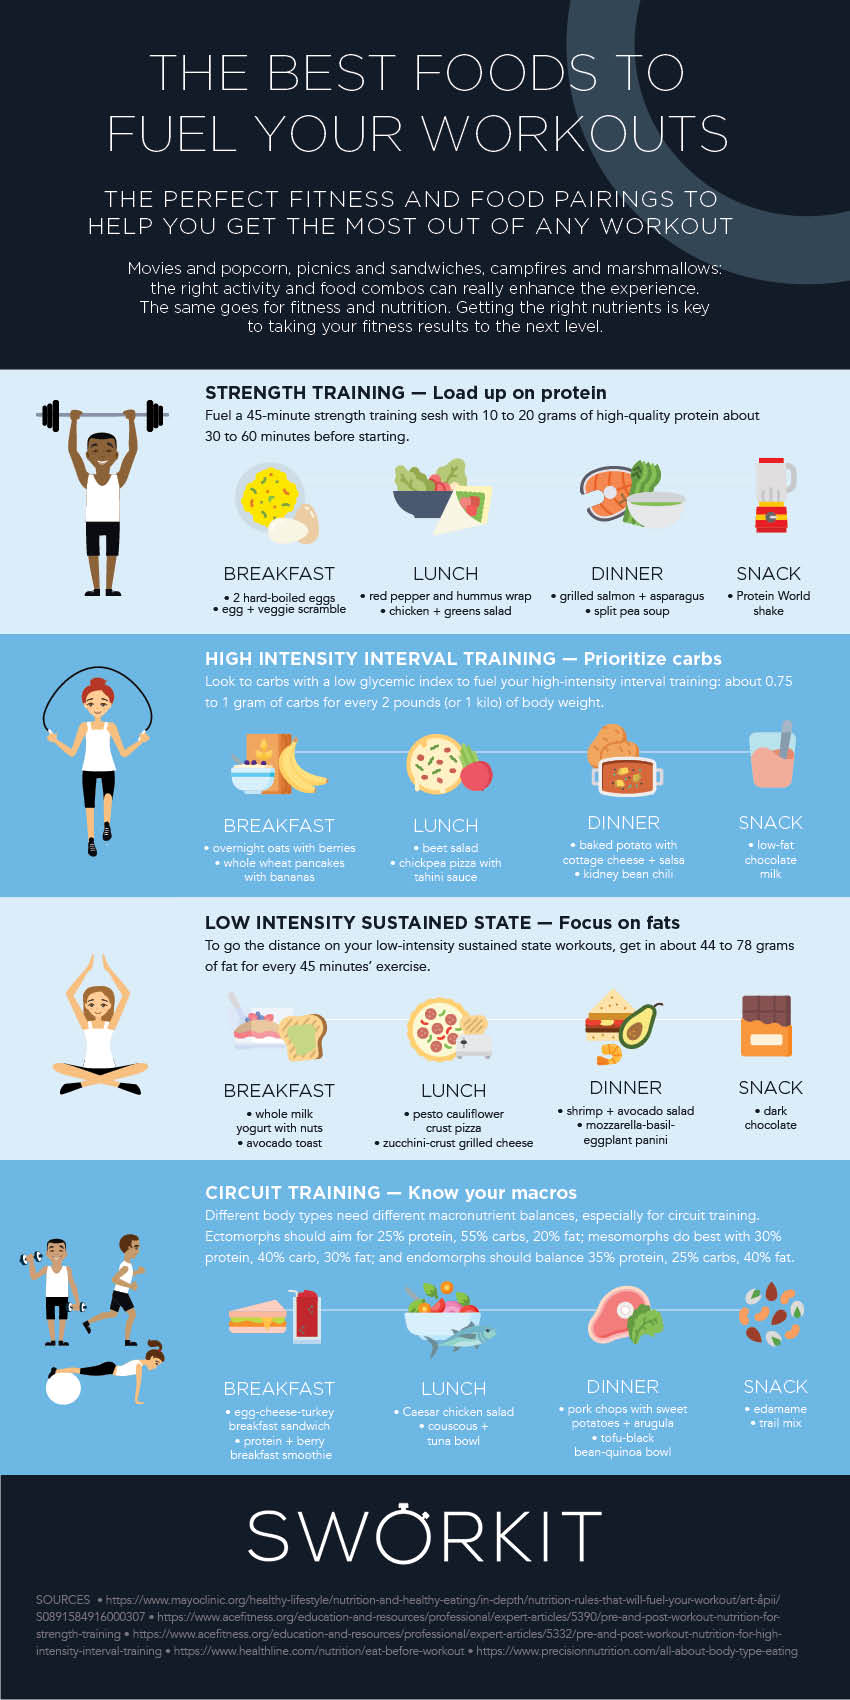 The Best Foods to Fuel Your Workouts